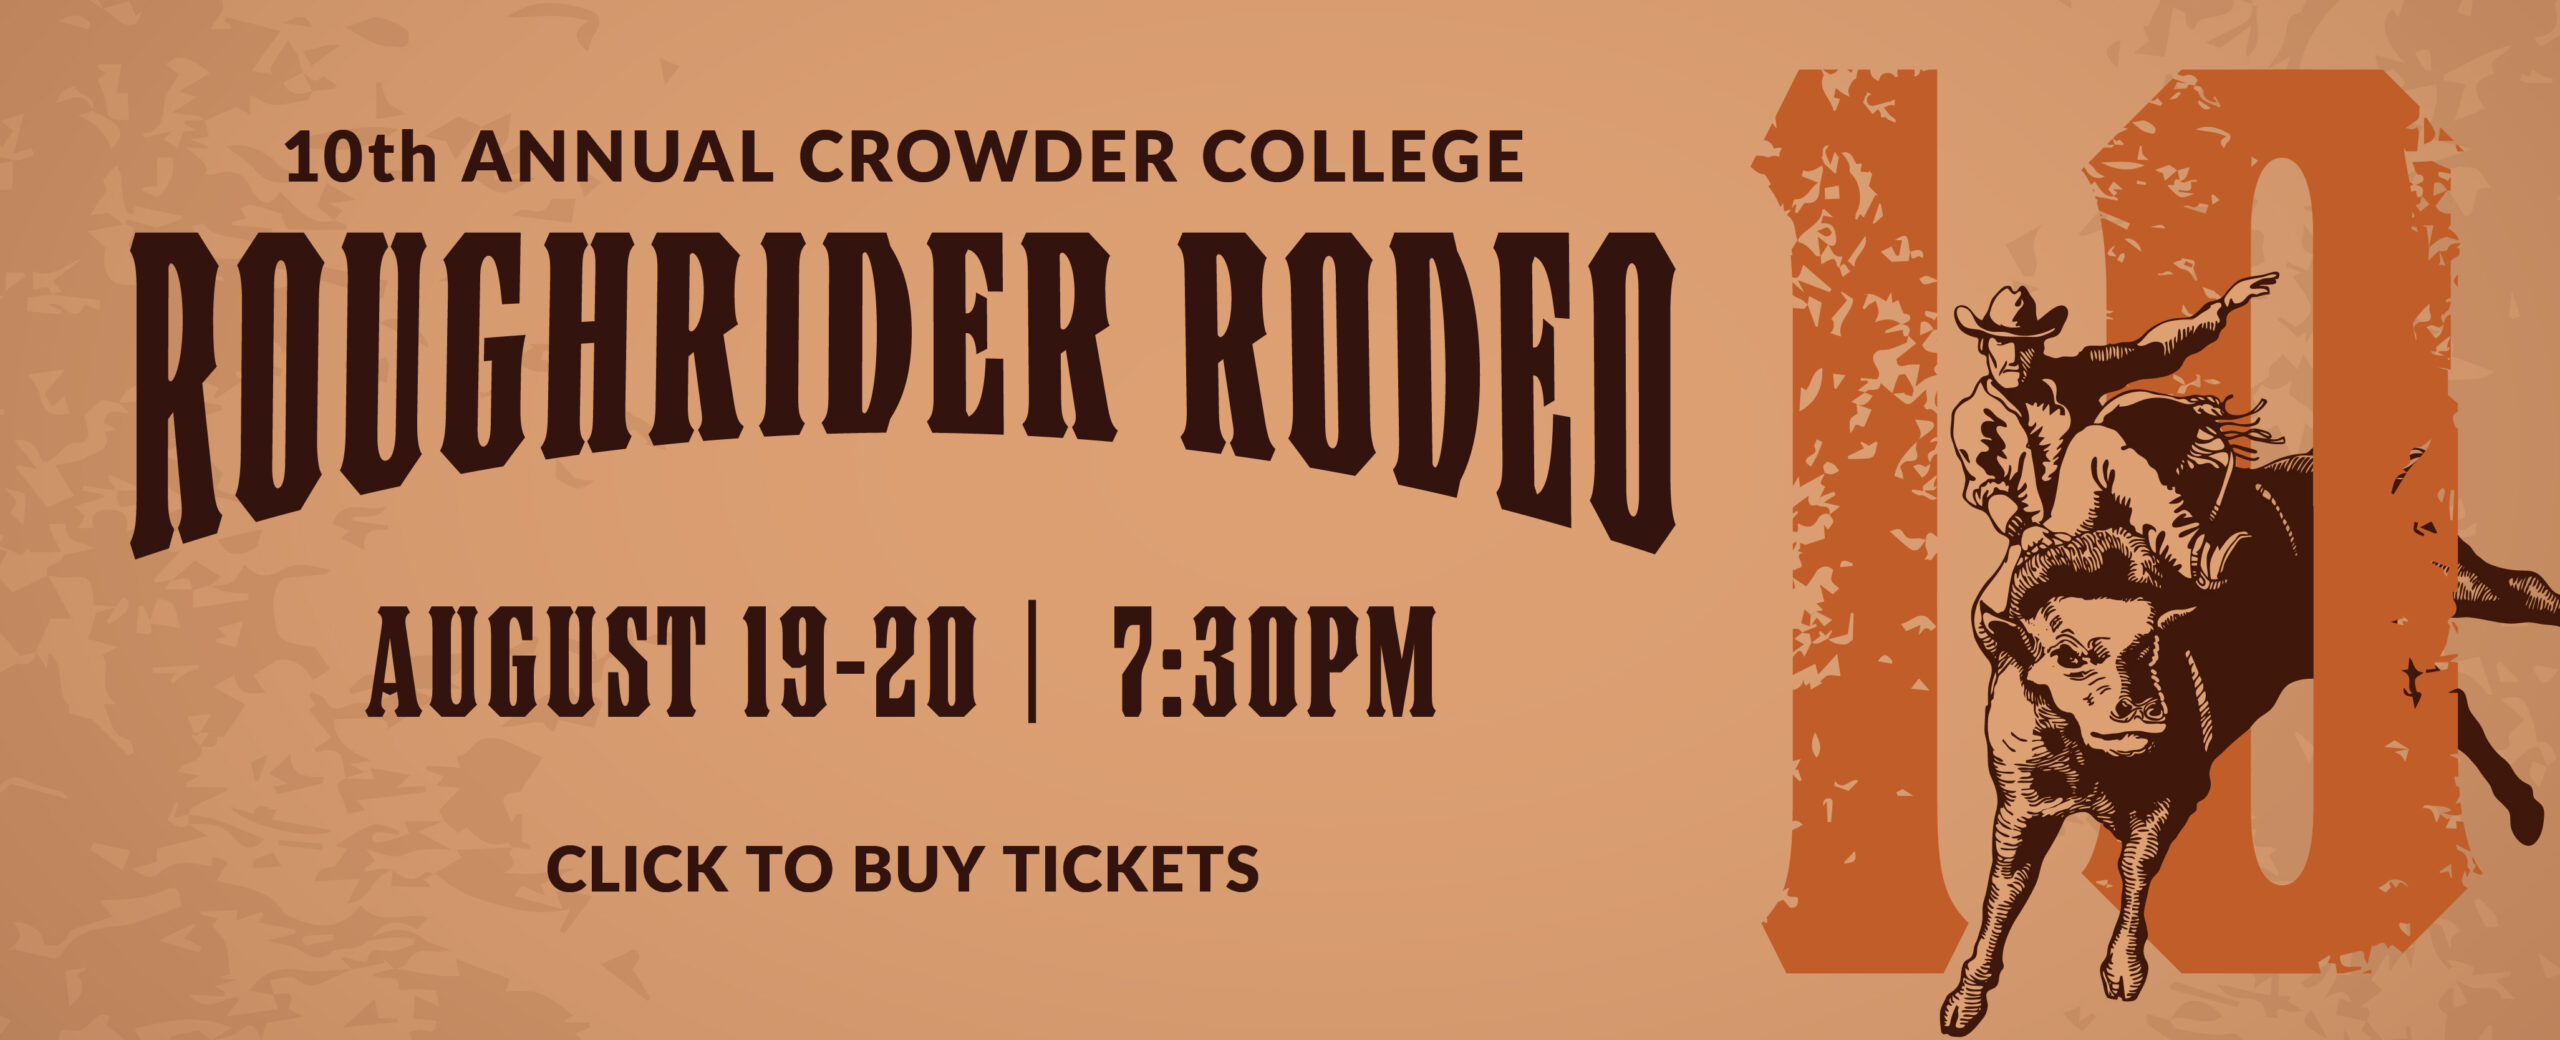 10th Annual Crowder College Roughrider Rodeo. August 19-20, 7:30pm. Click to purchase tickets.